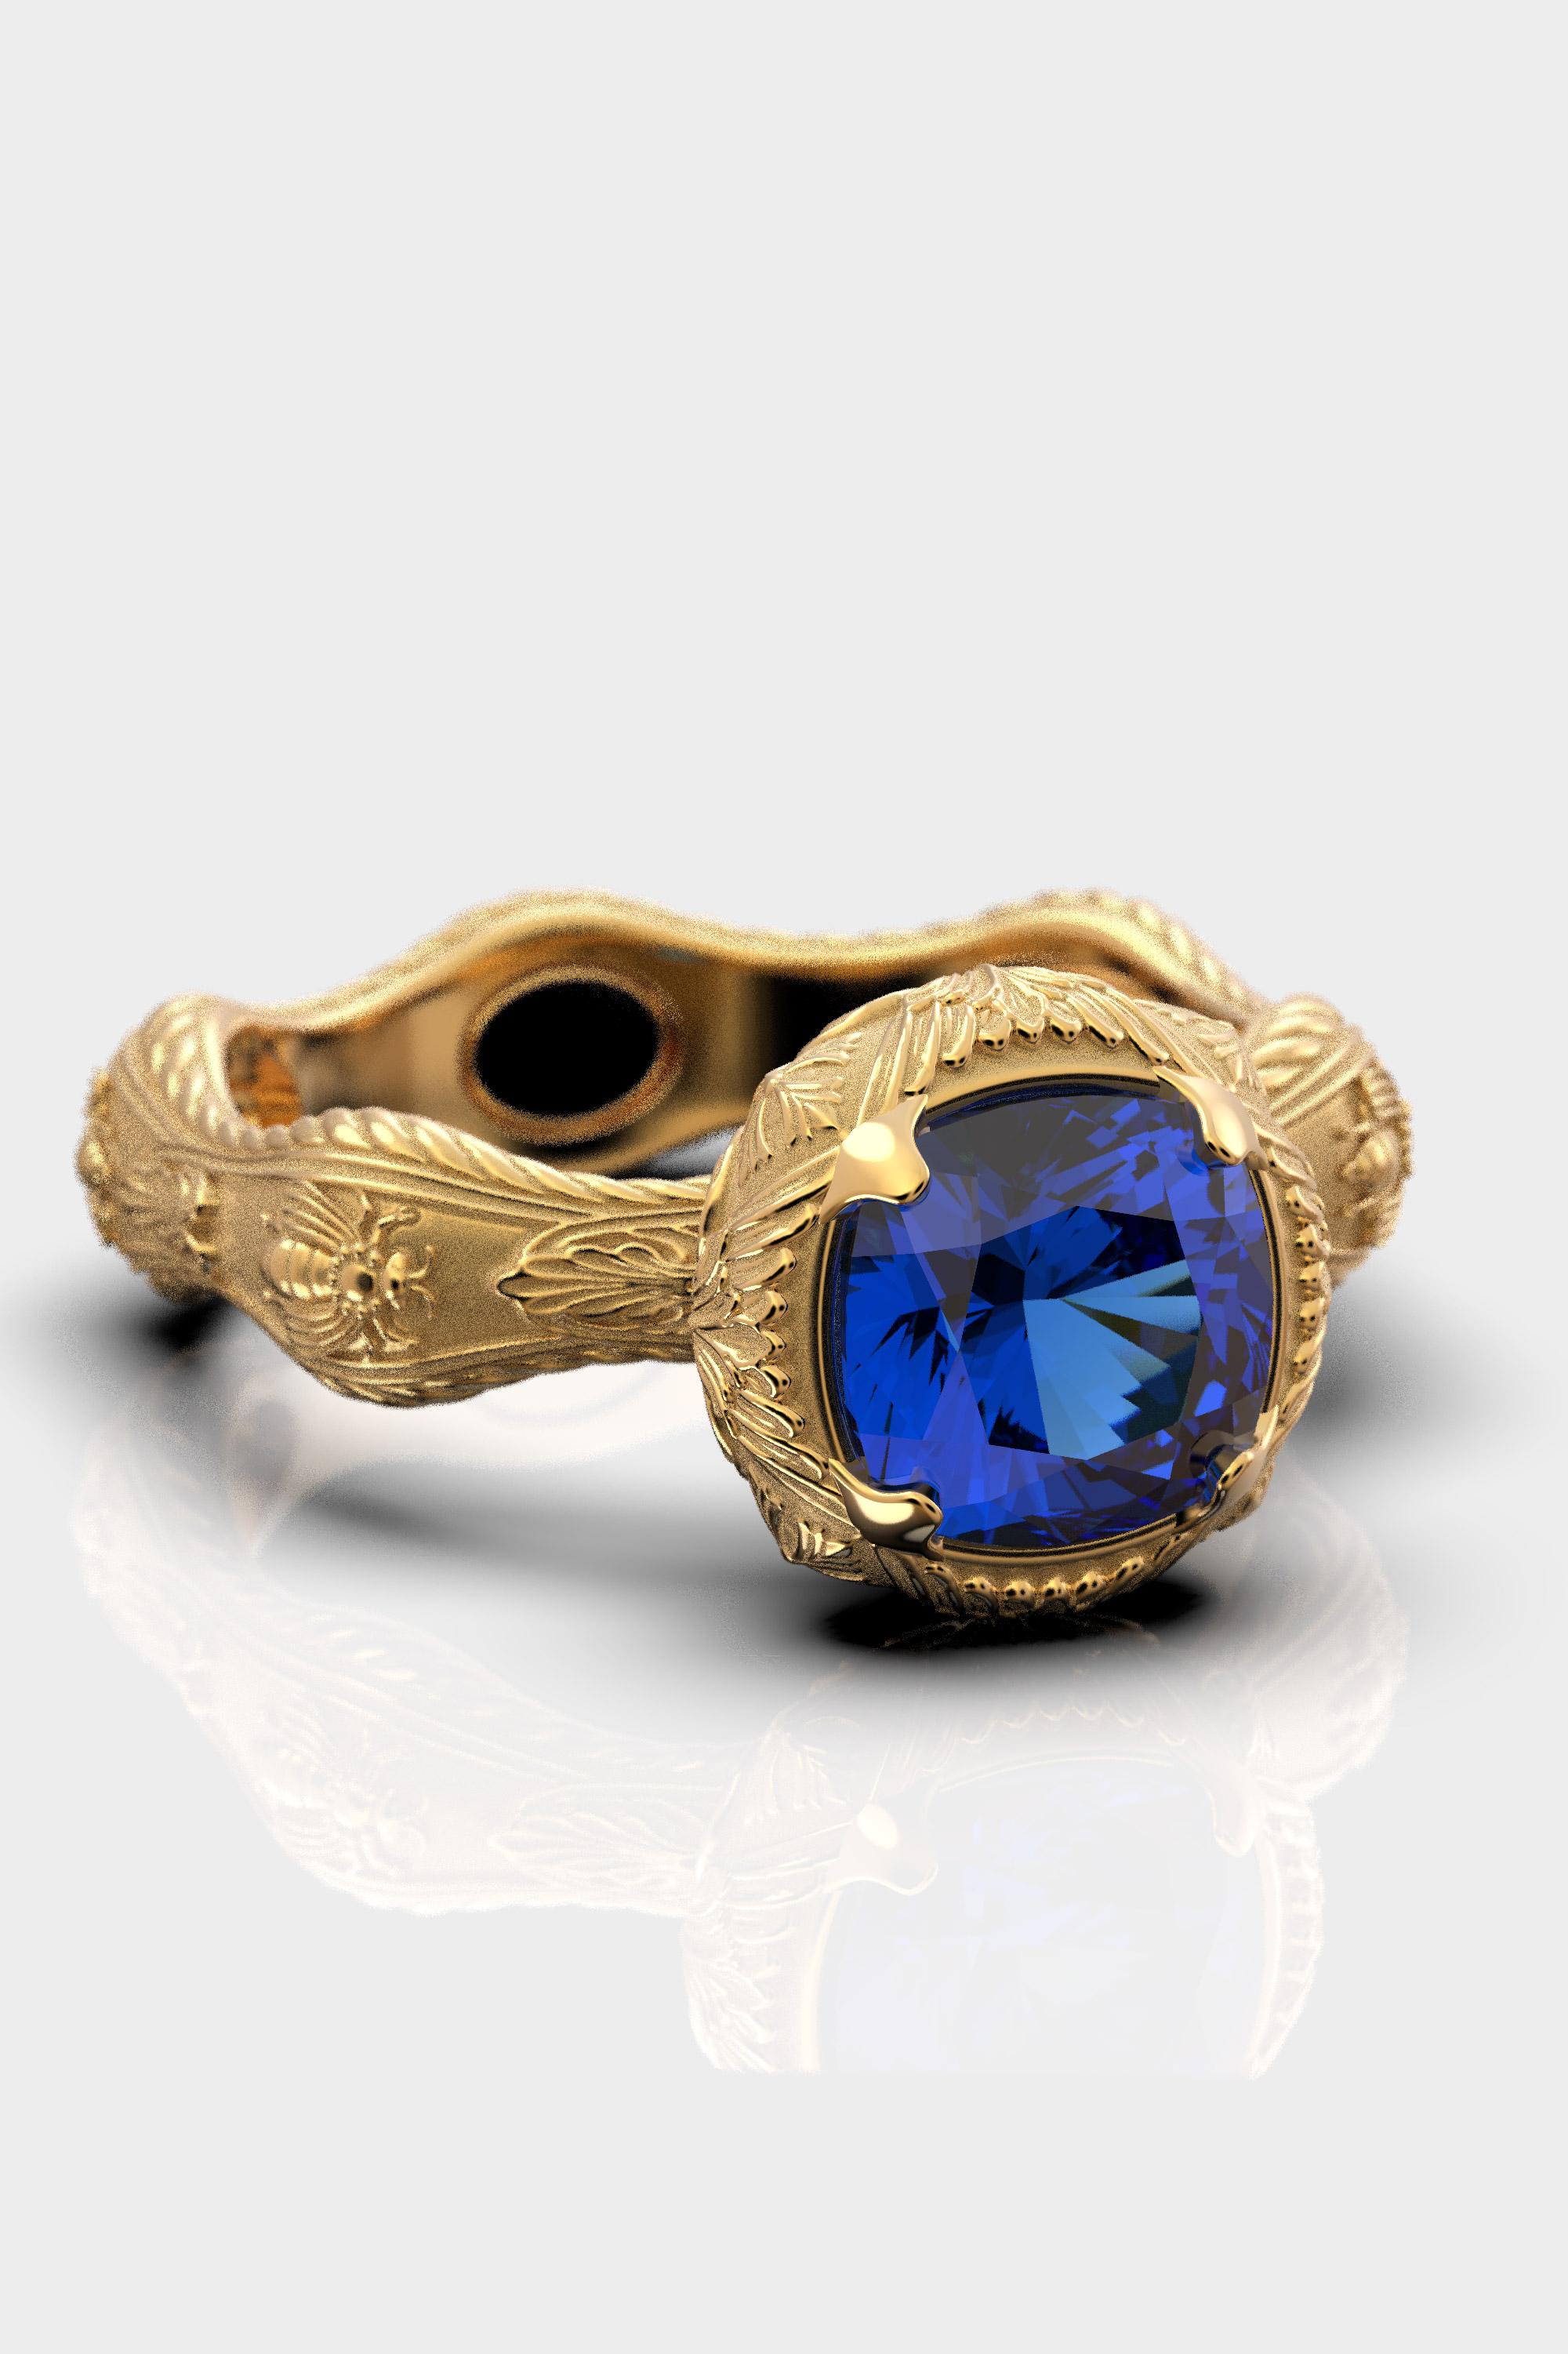 For Sale:  Tanzanite Ring Made In Italy by Oltremare Gioielli in 18k genuine gold 3